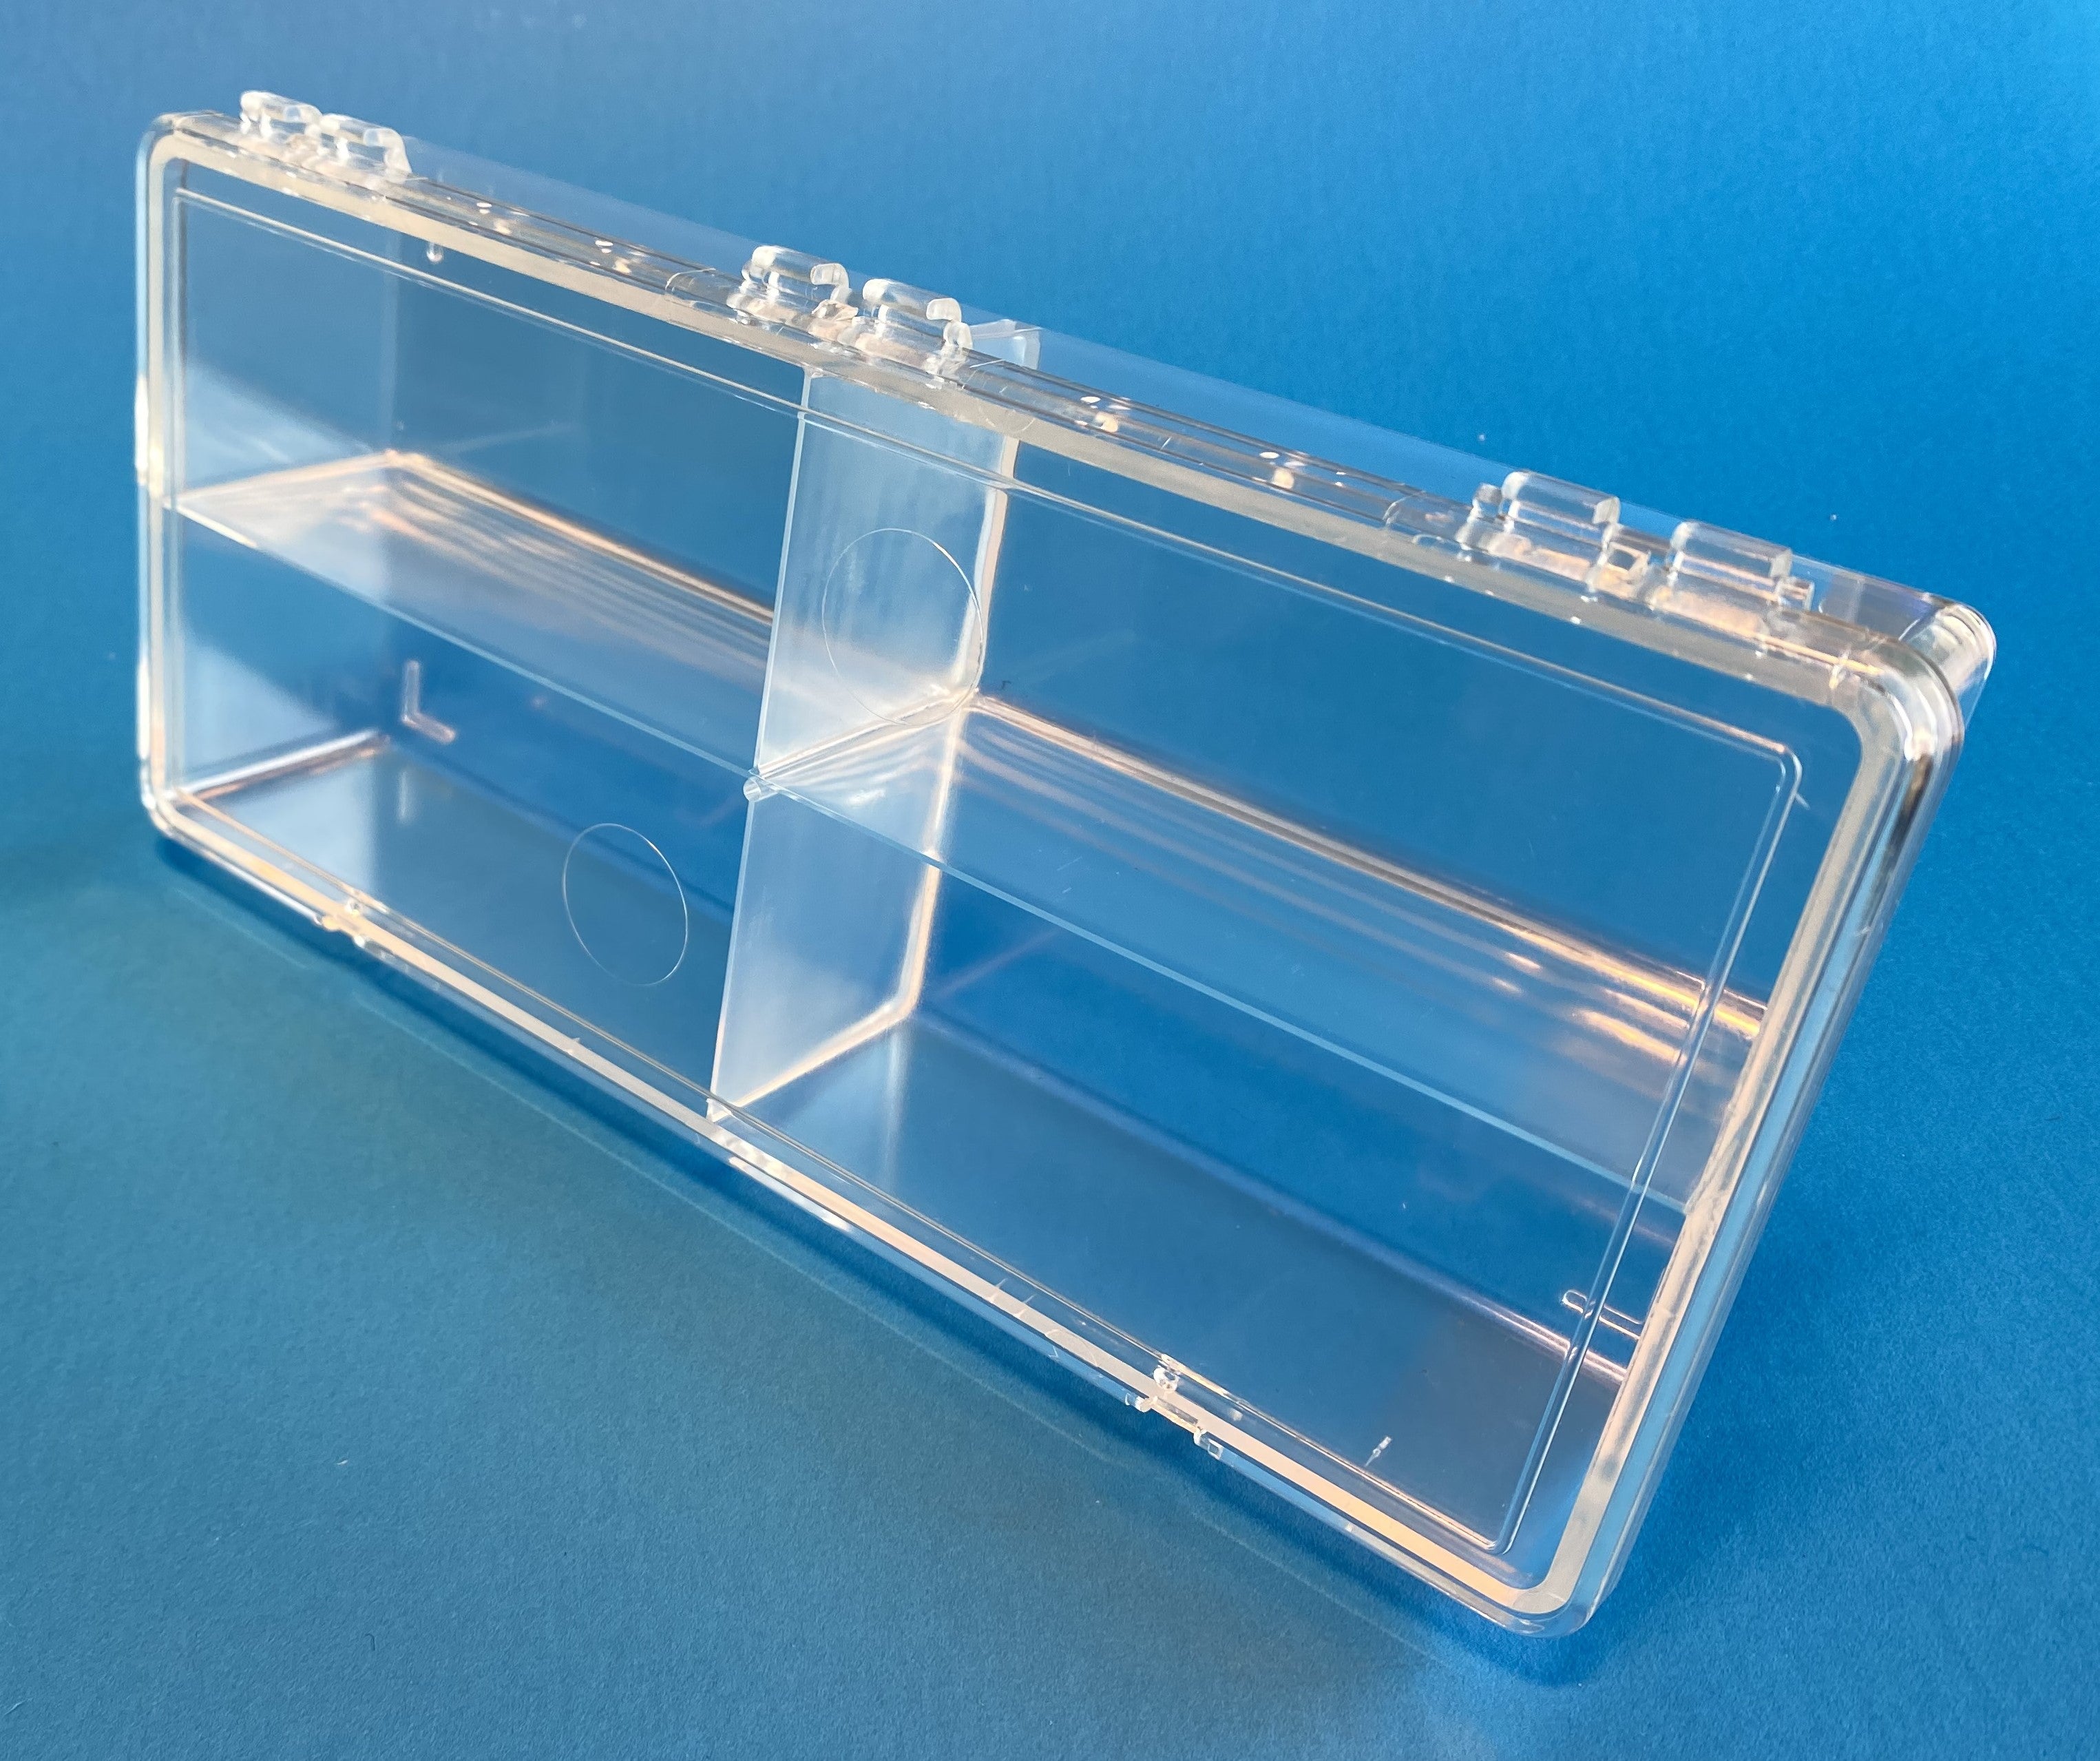 D54 Case, 4 Bays, Clear Impact-Protected Copolymer (carton of 36 ea)